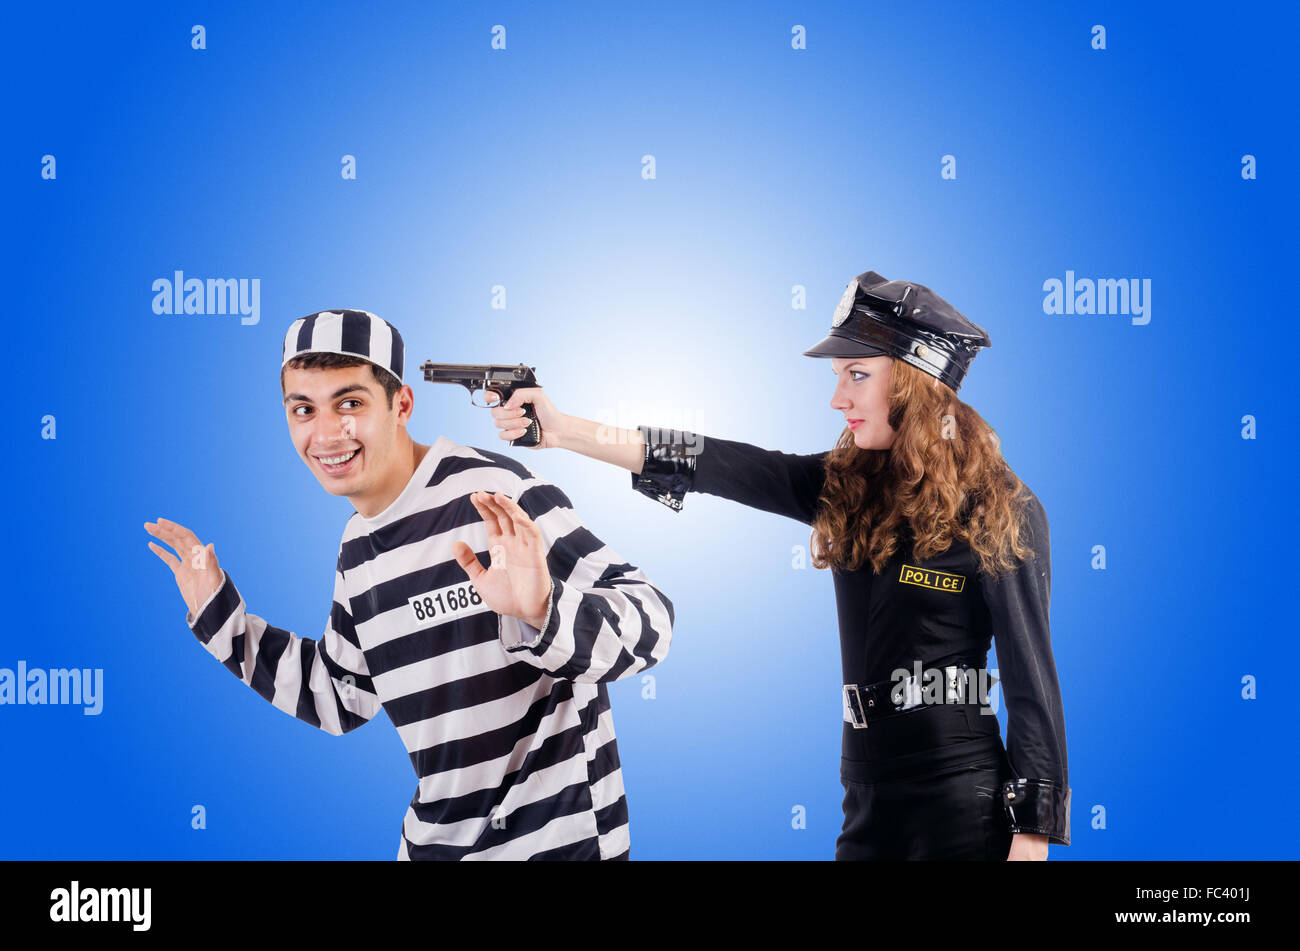 Police and prison inmate against the gradient Stock Photo